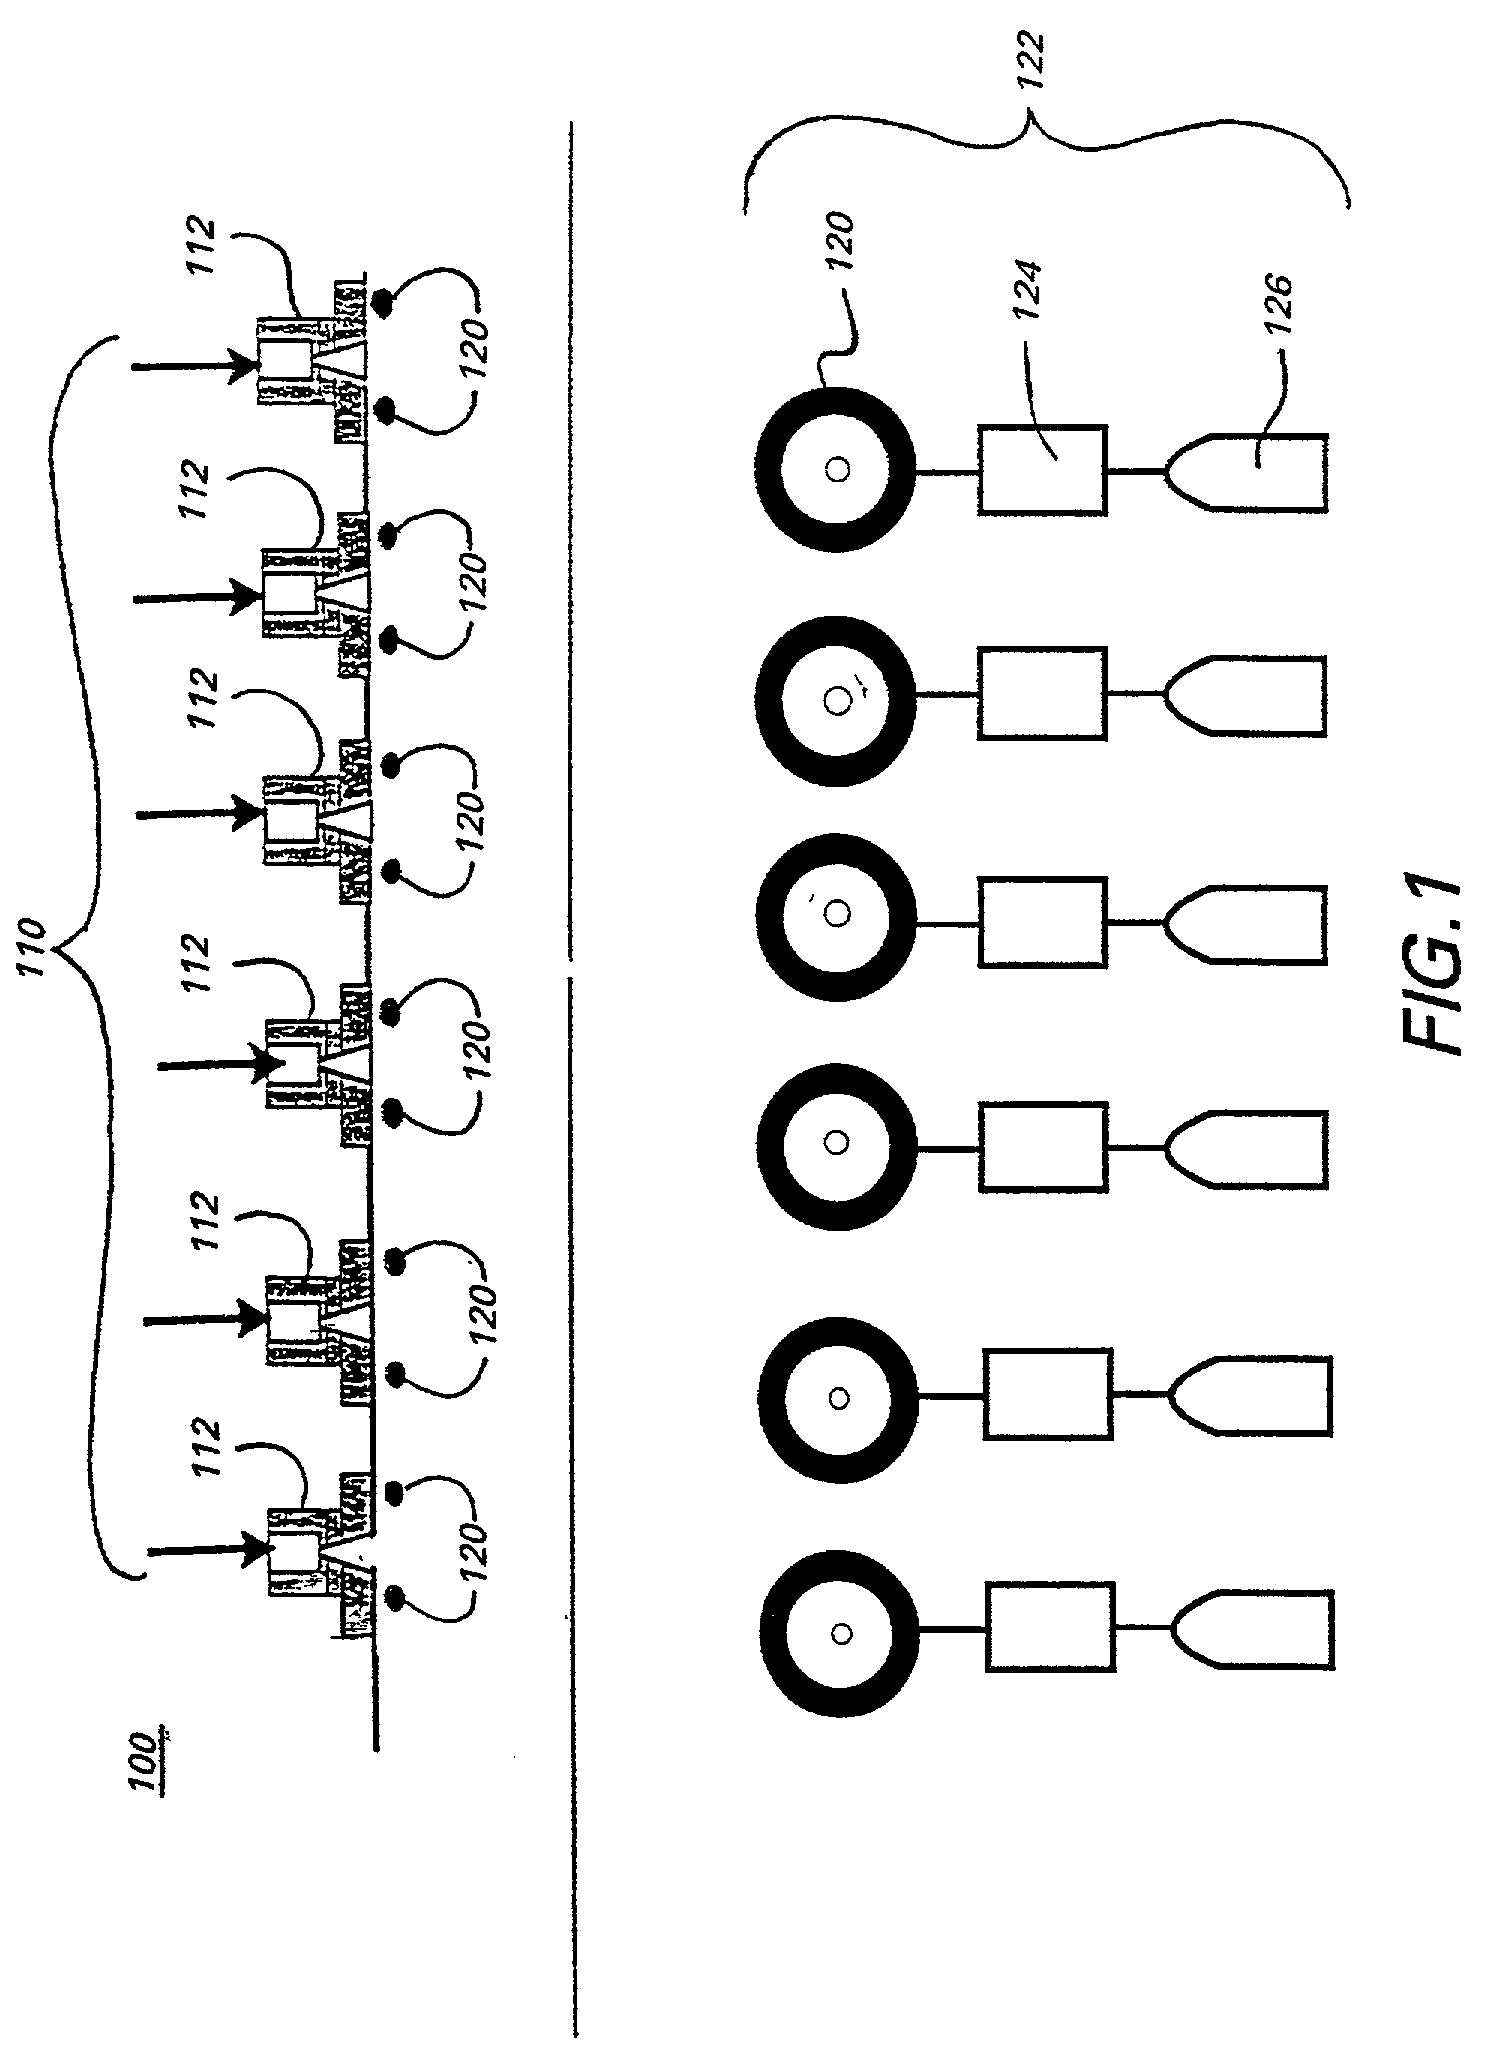 Processes and systems for determining the identity of metal alloys